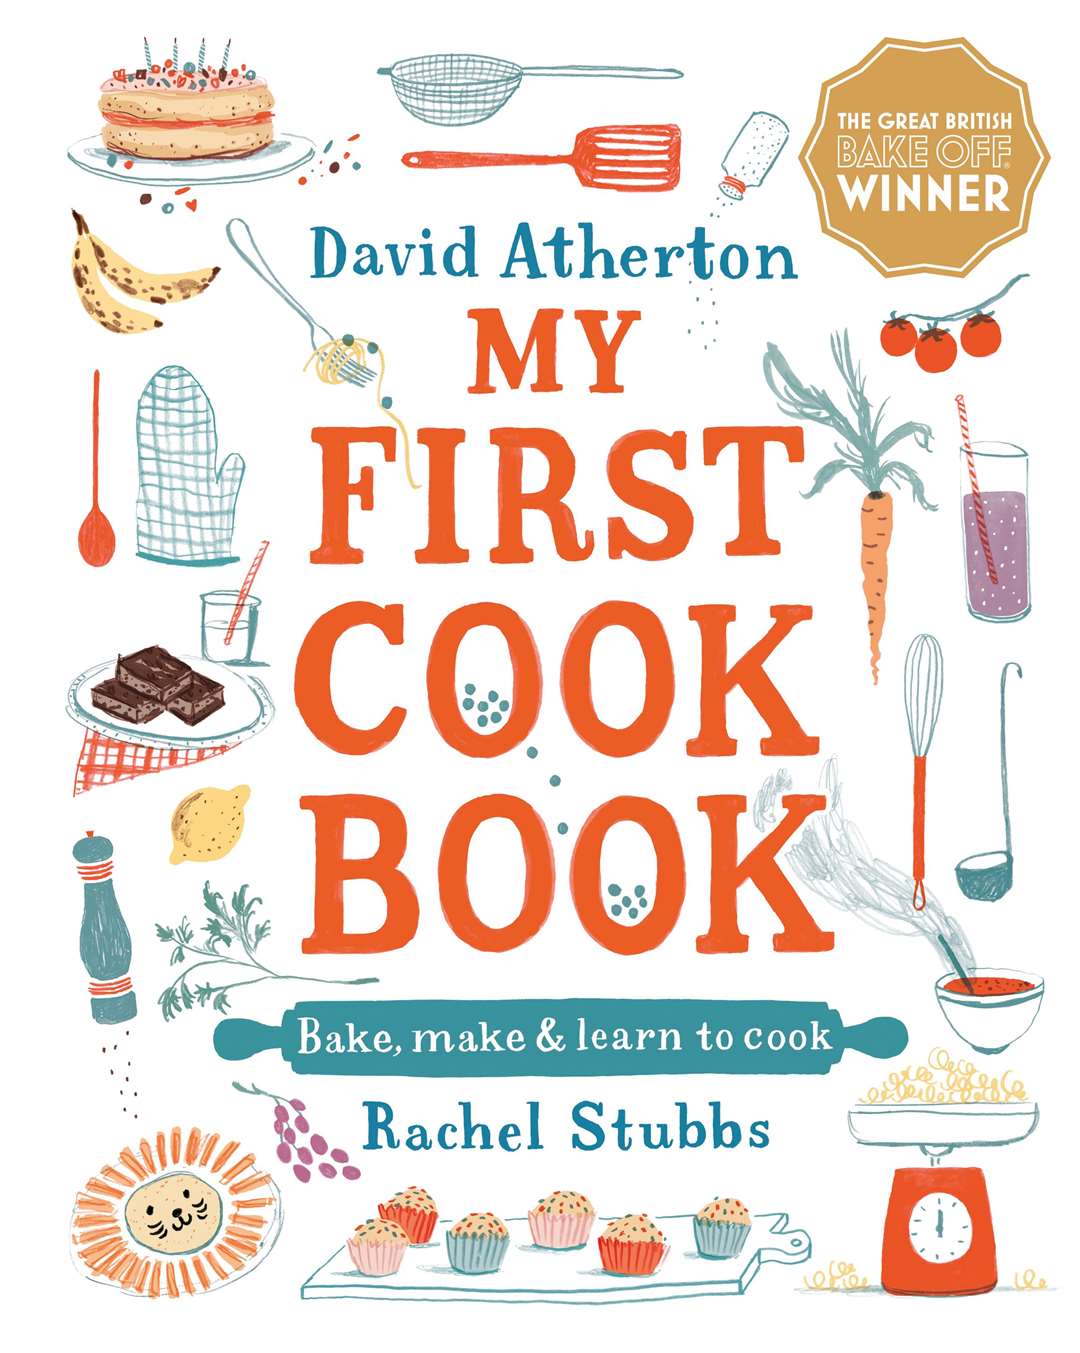 My First Cookbook by David Atherton, illustrated by Rachel Stubbs.